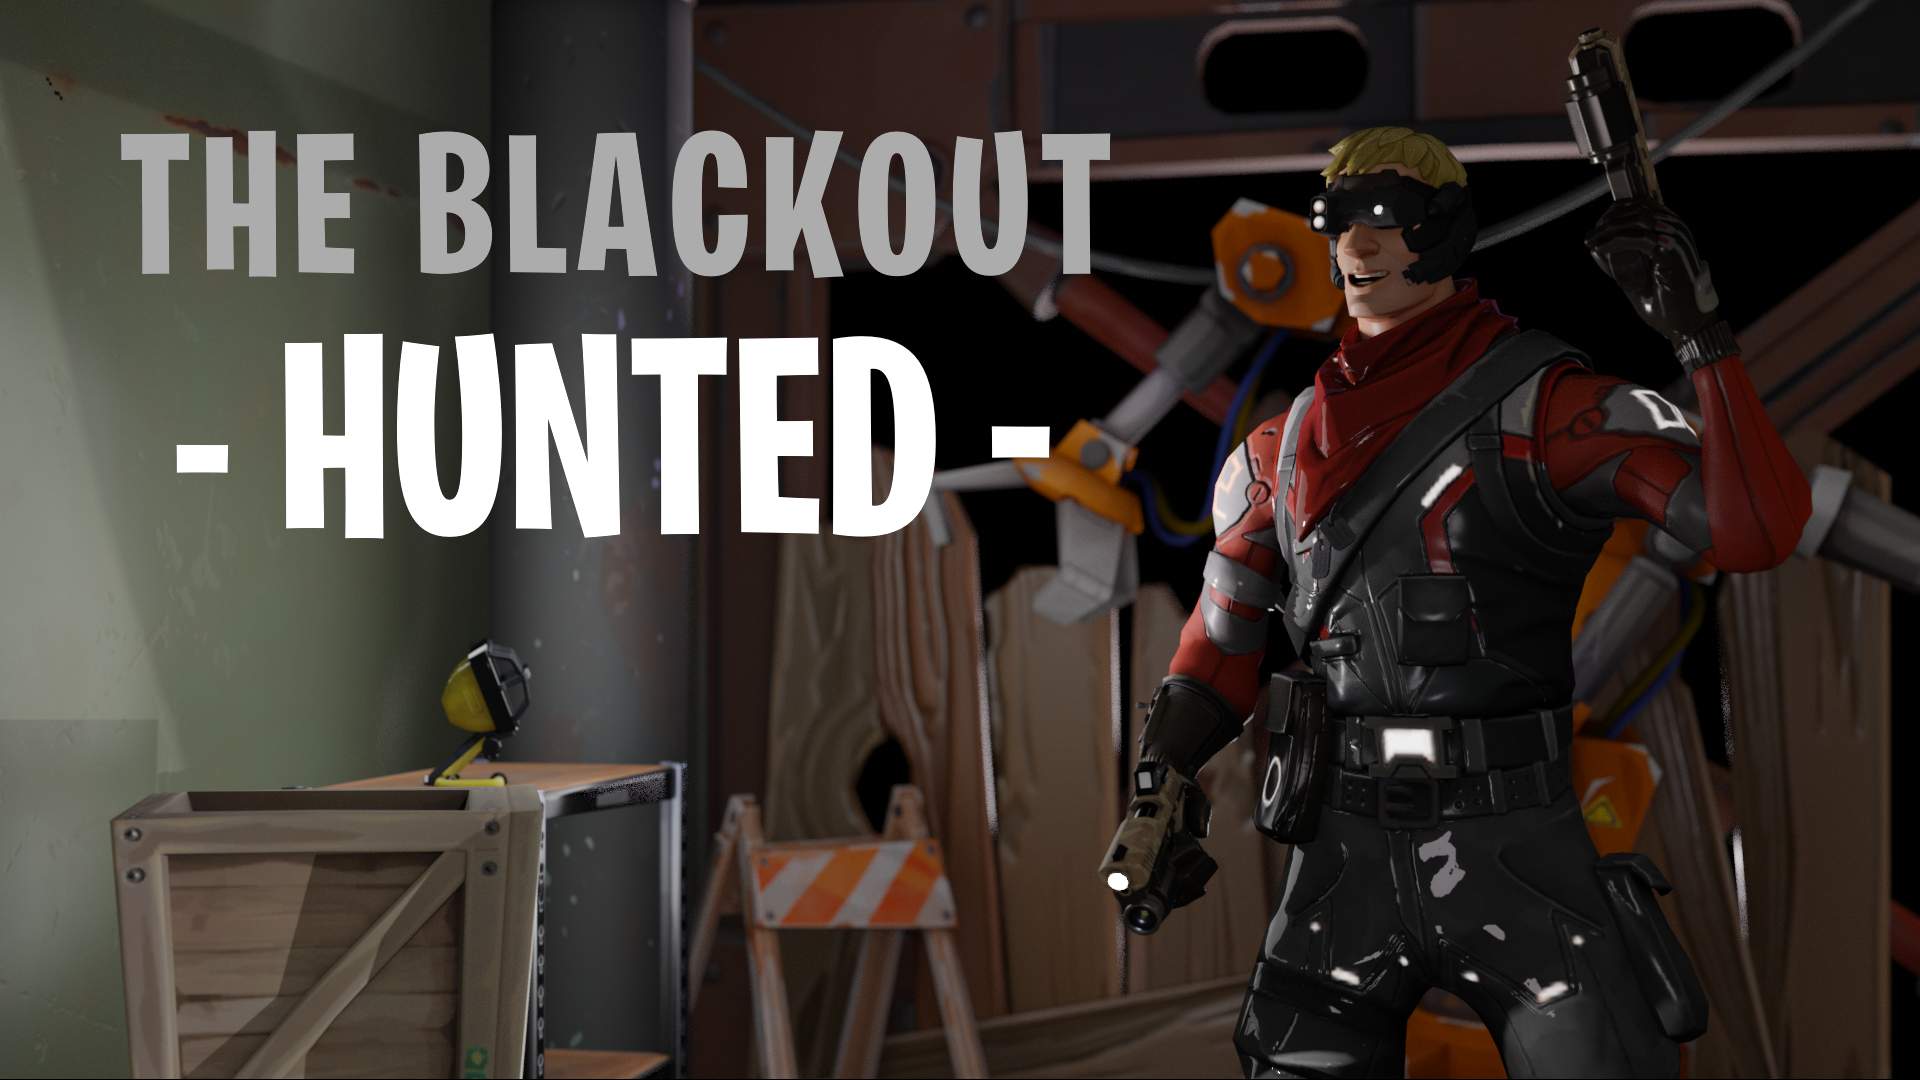 THE BLACKOUT: HUNTED